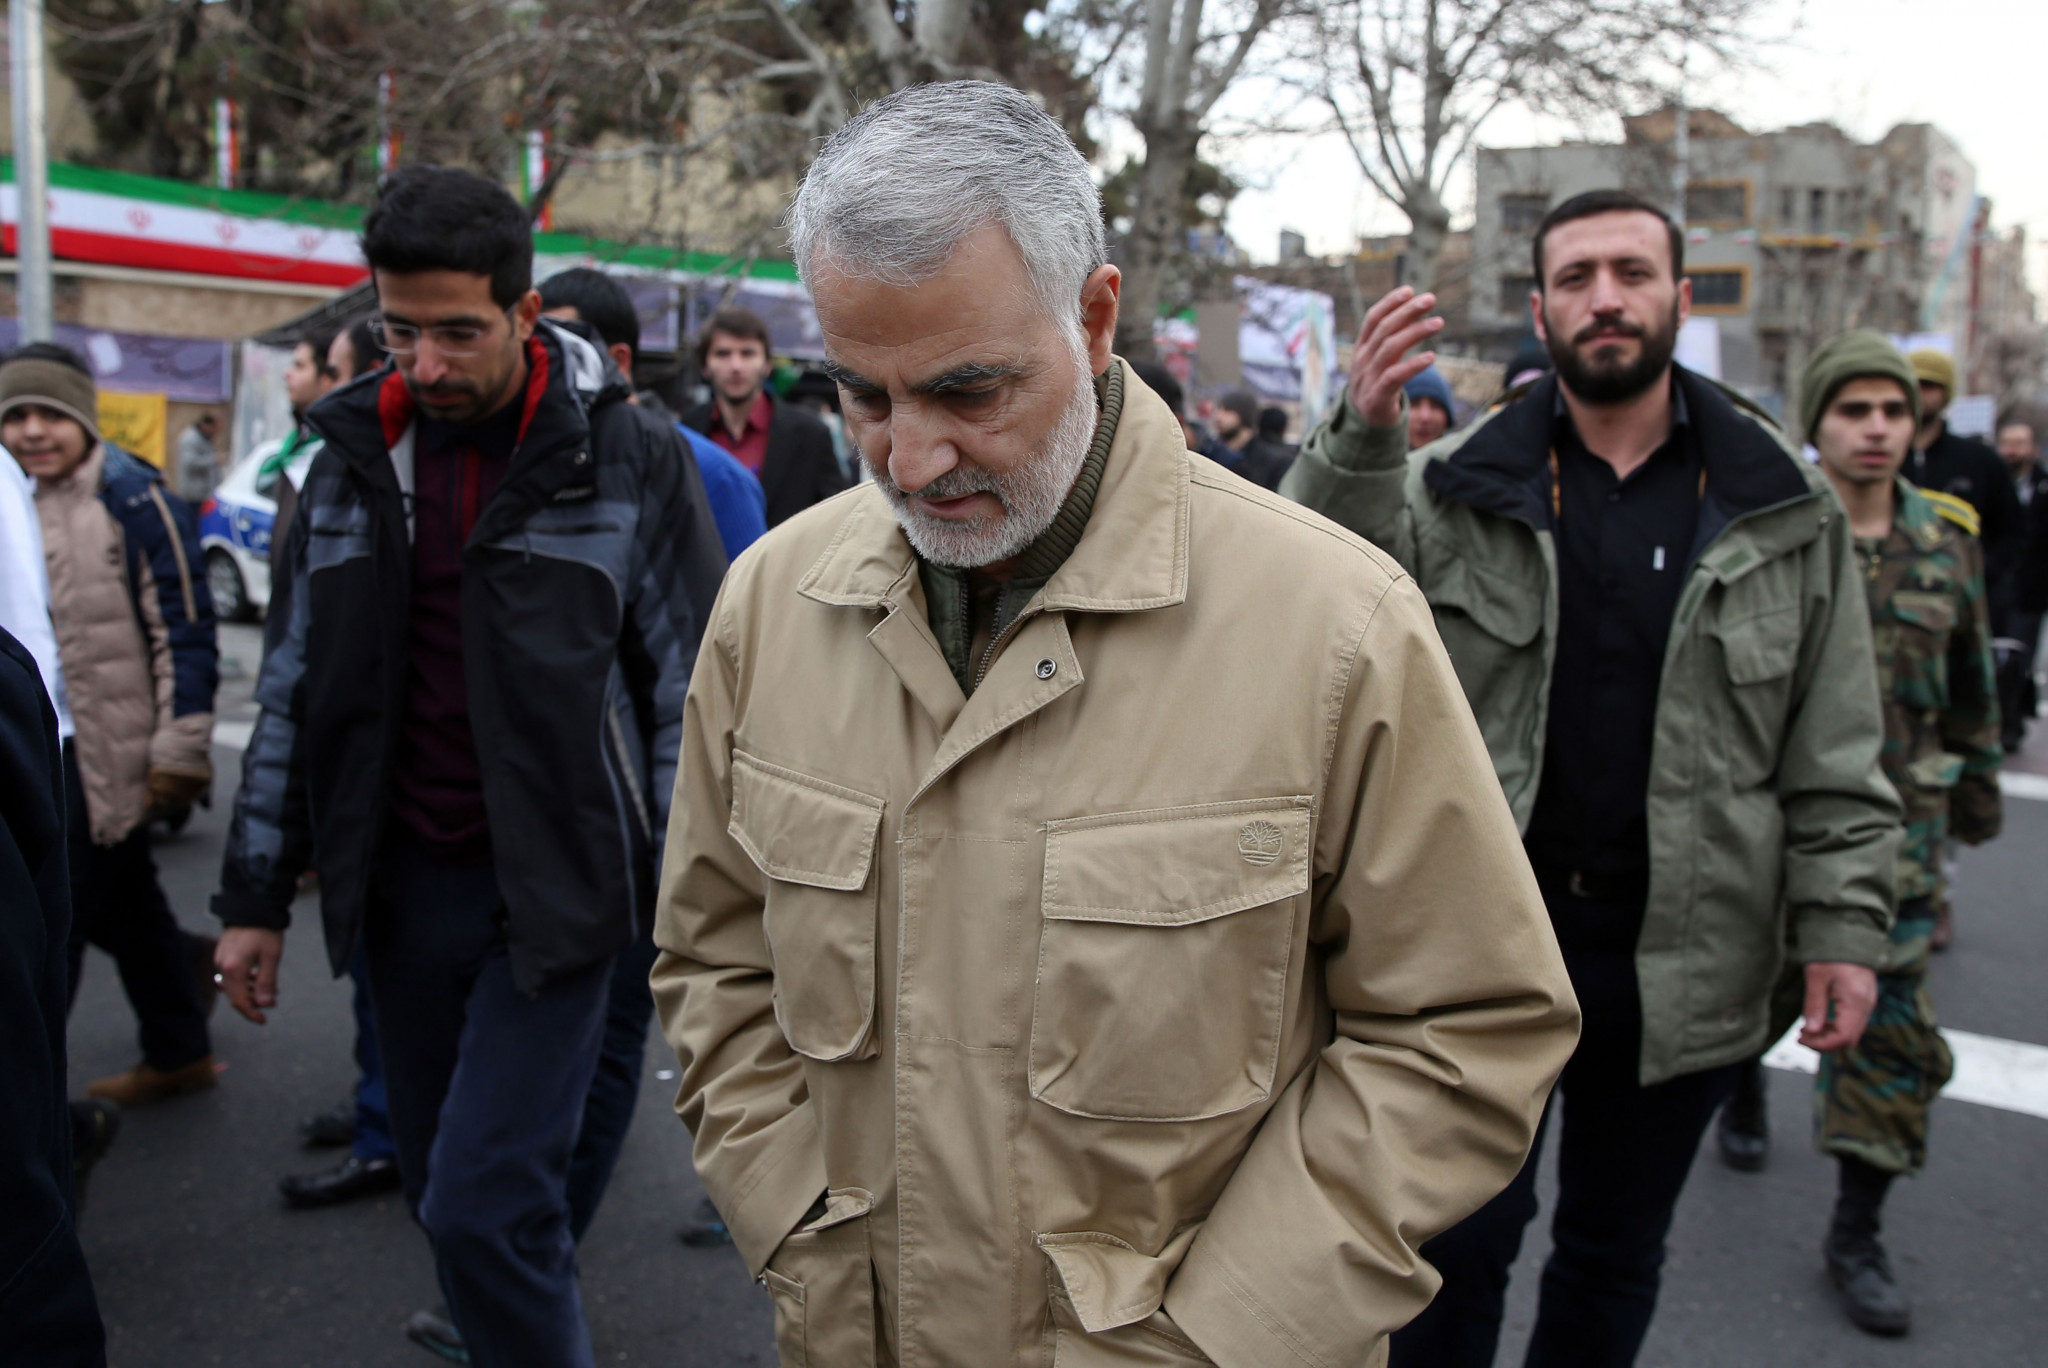 Qasem Soleimani was killed in an airstrike ordered by US President Donald Trump ©Getty Images